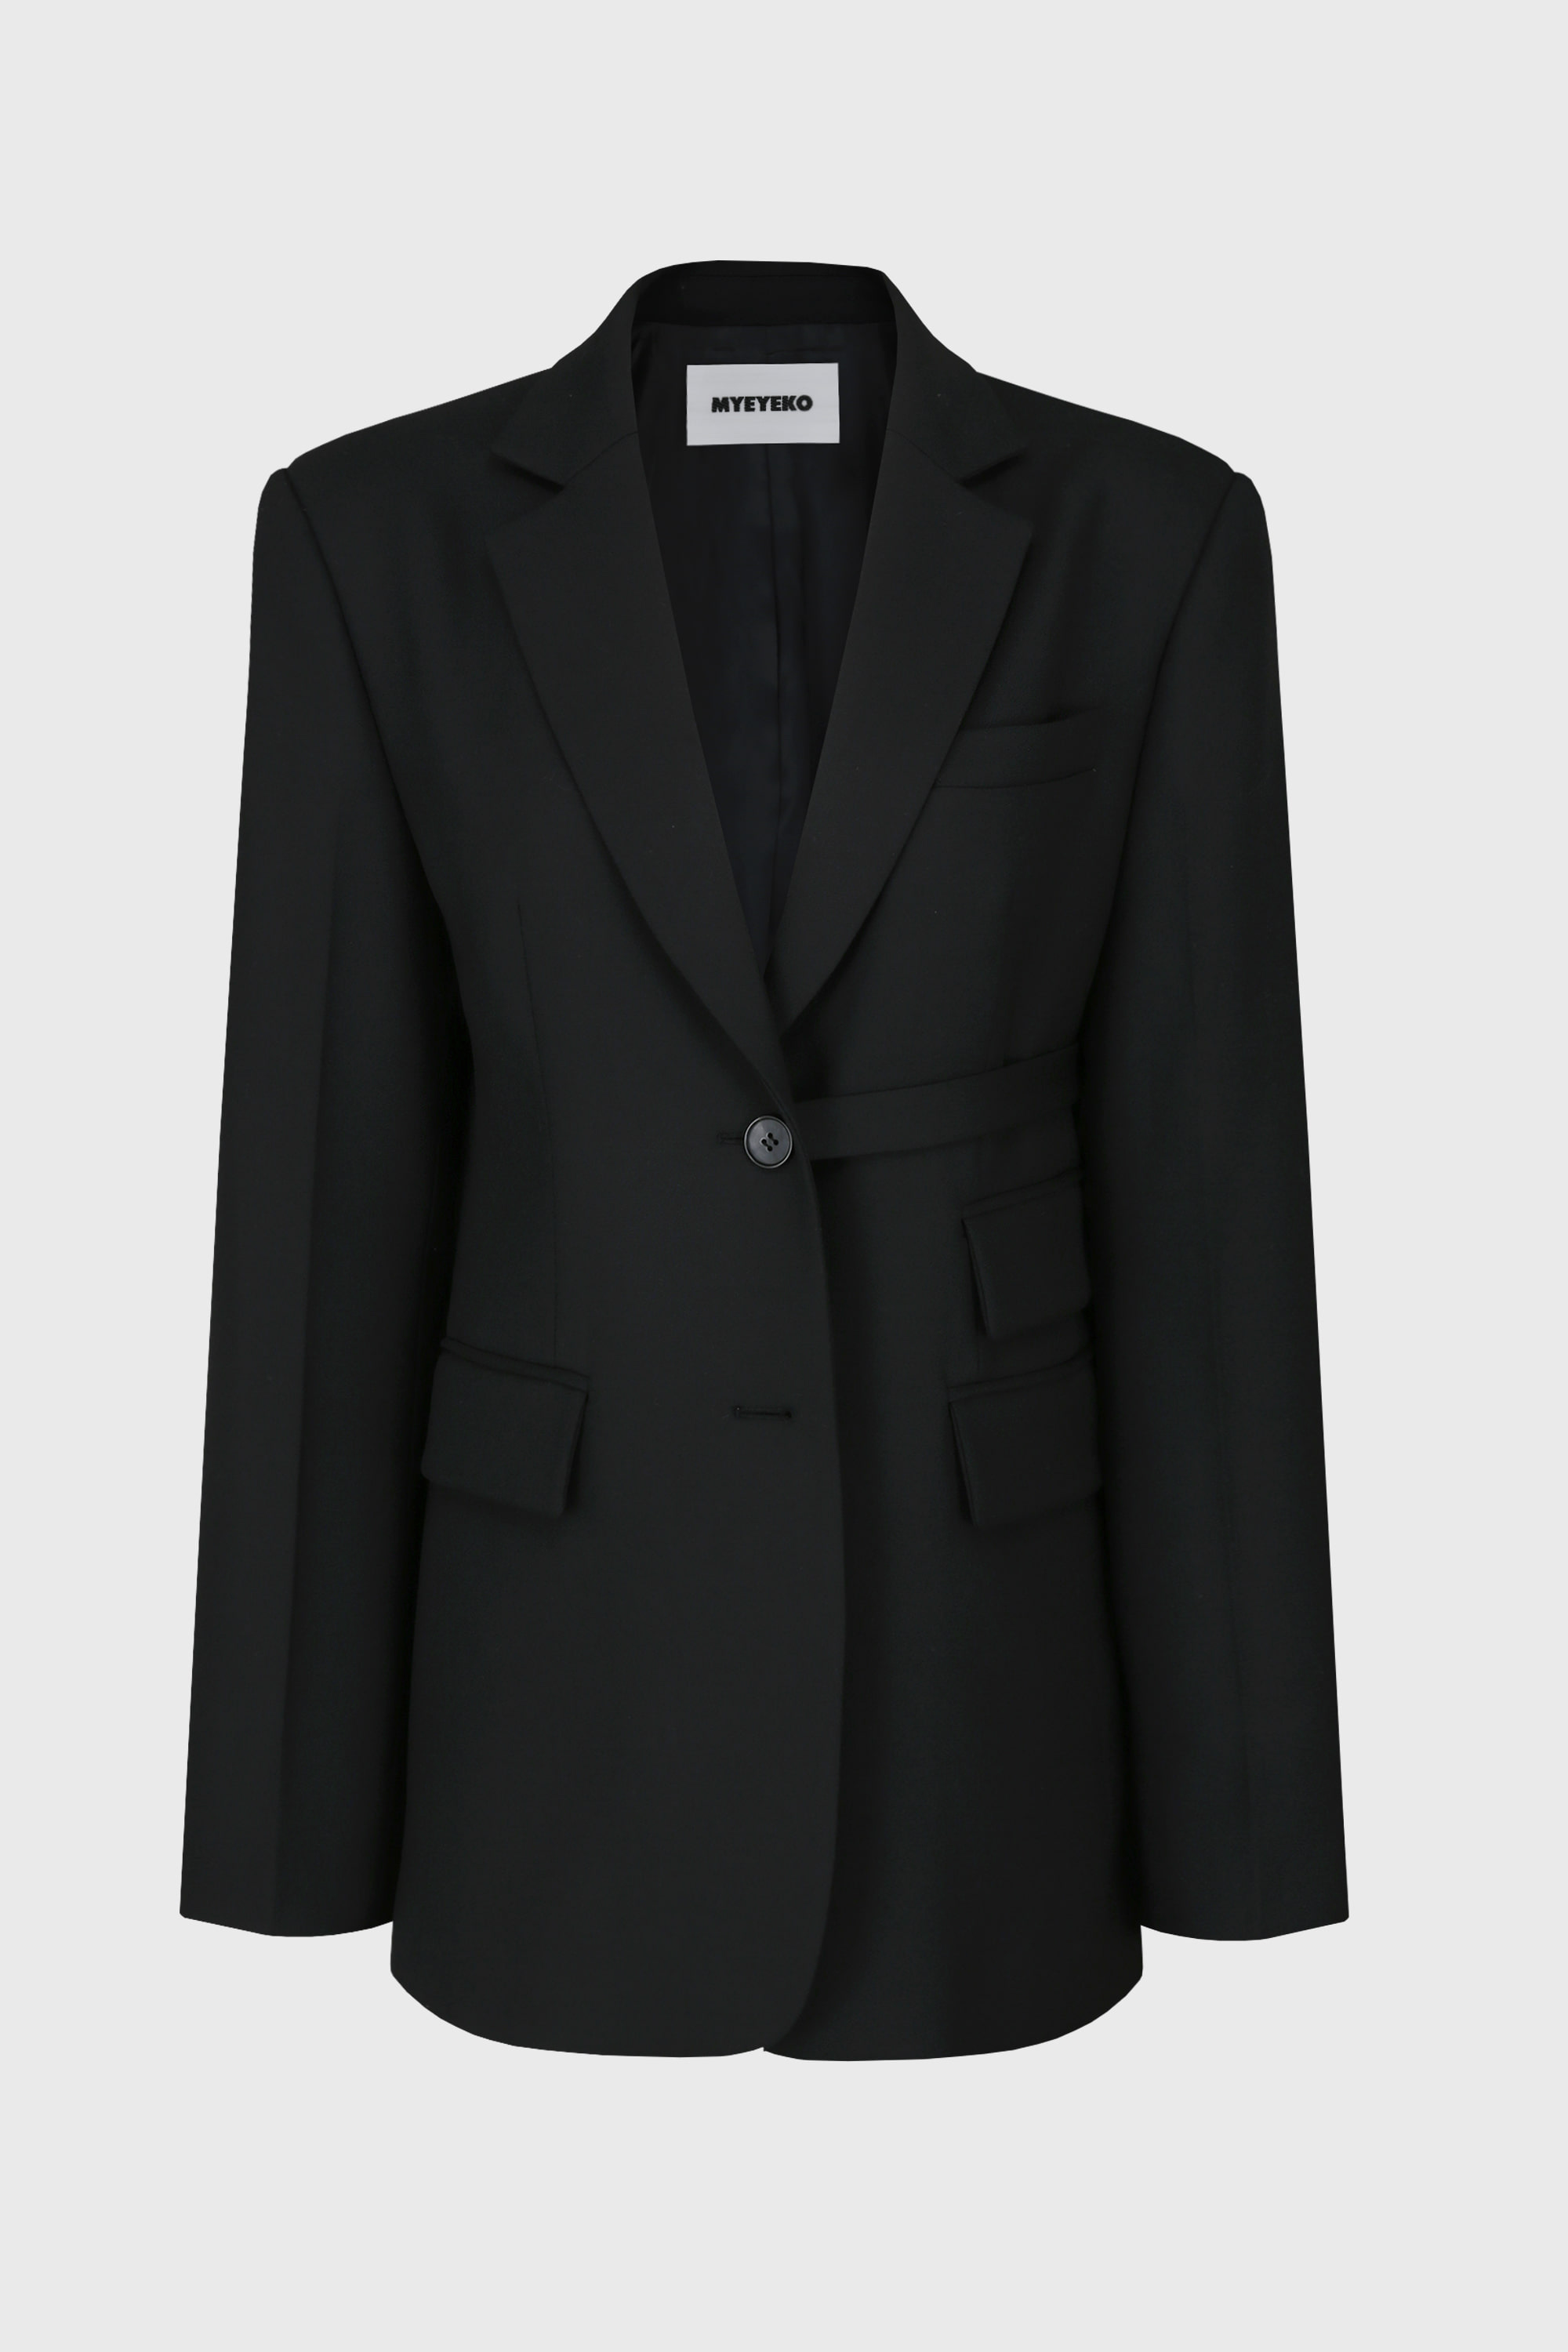 HIGH QUALITY LINE - SINGLE-BREASTED JACKET (BLACK)